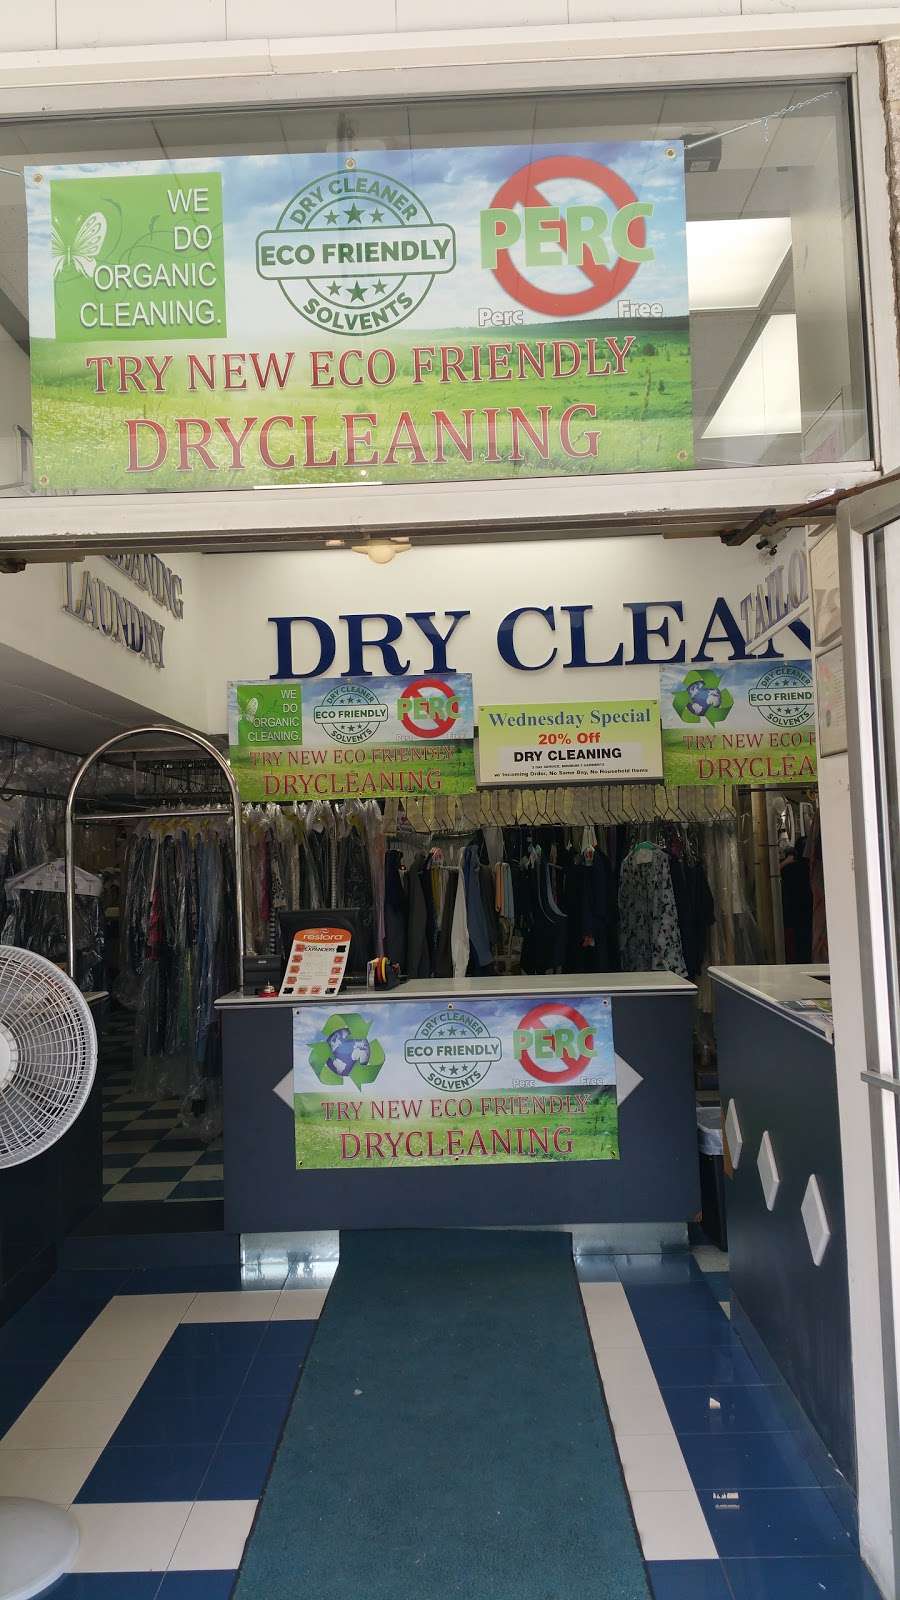 Dryclean Plus | 11530 Rockville Pike E, Rockville, MD 20852, USA | Phone: (301) 231-9445